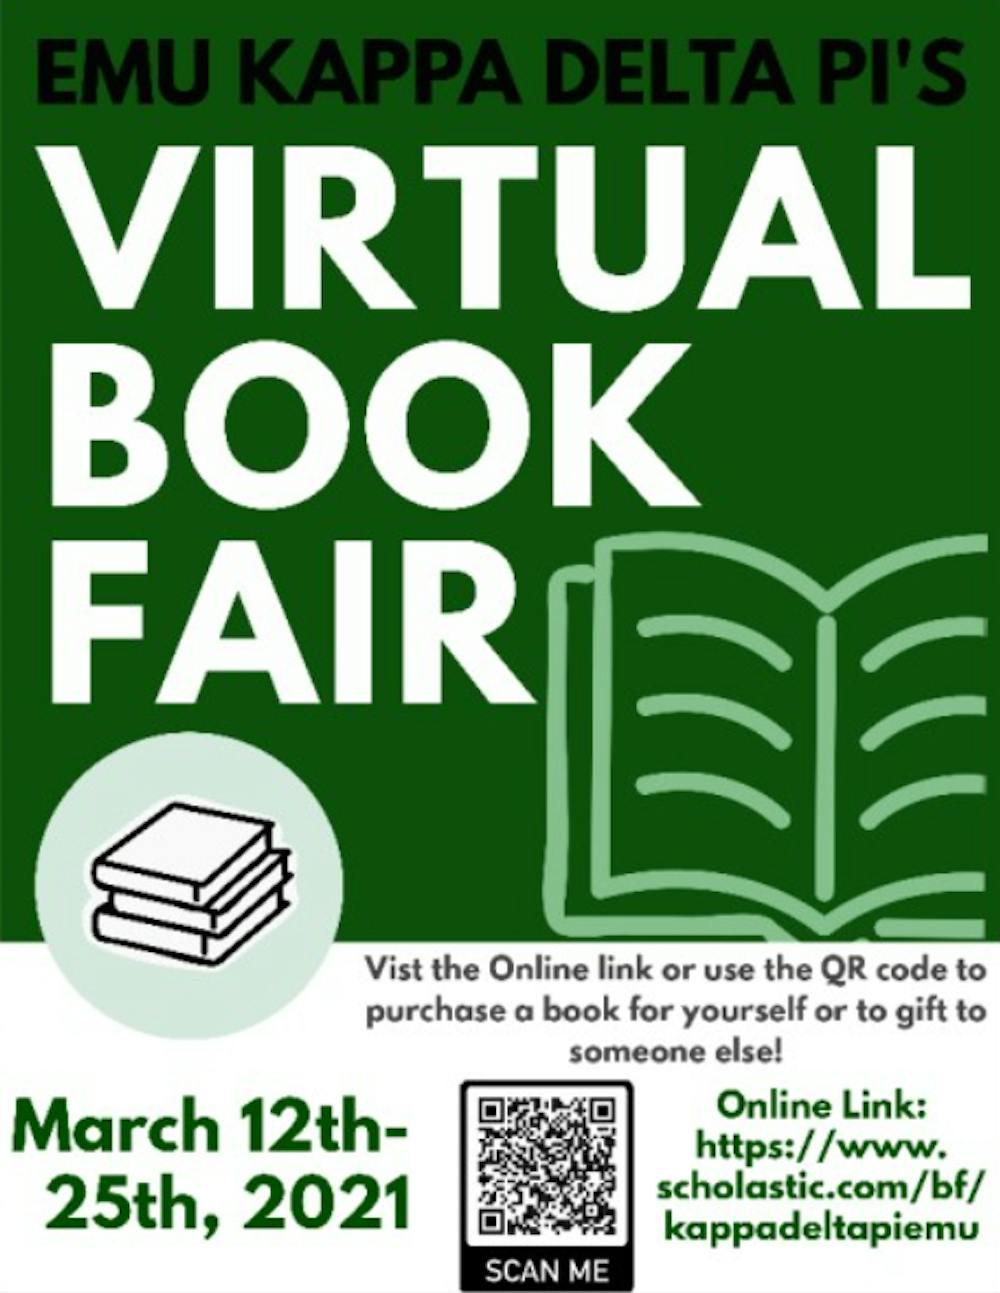 Kappa Delta Pi Hosts a book drive and virtual book fair during National Reading Month